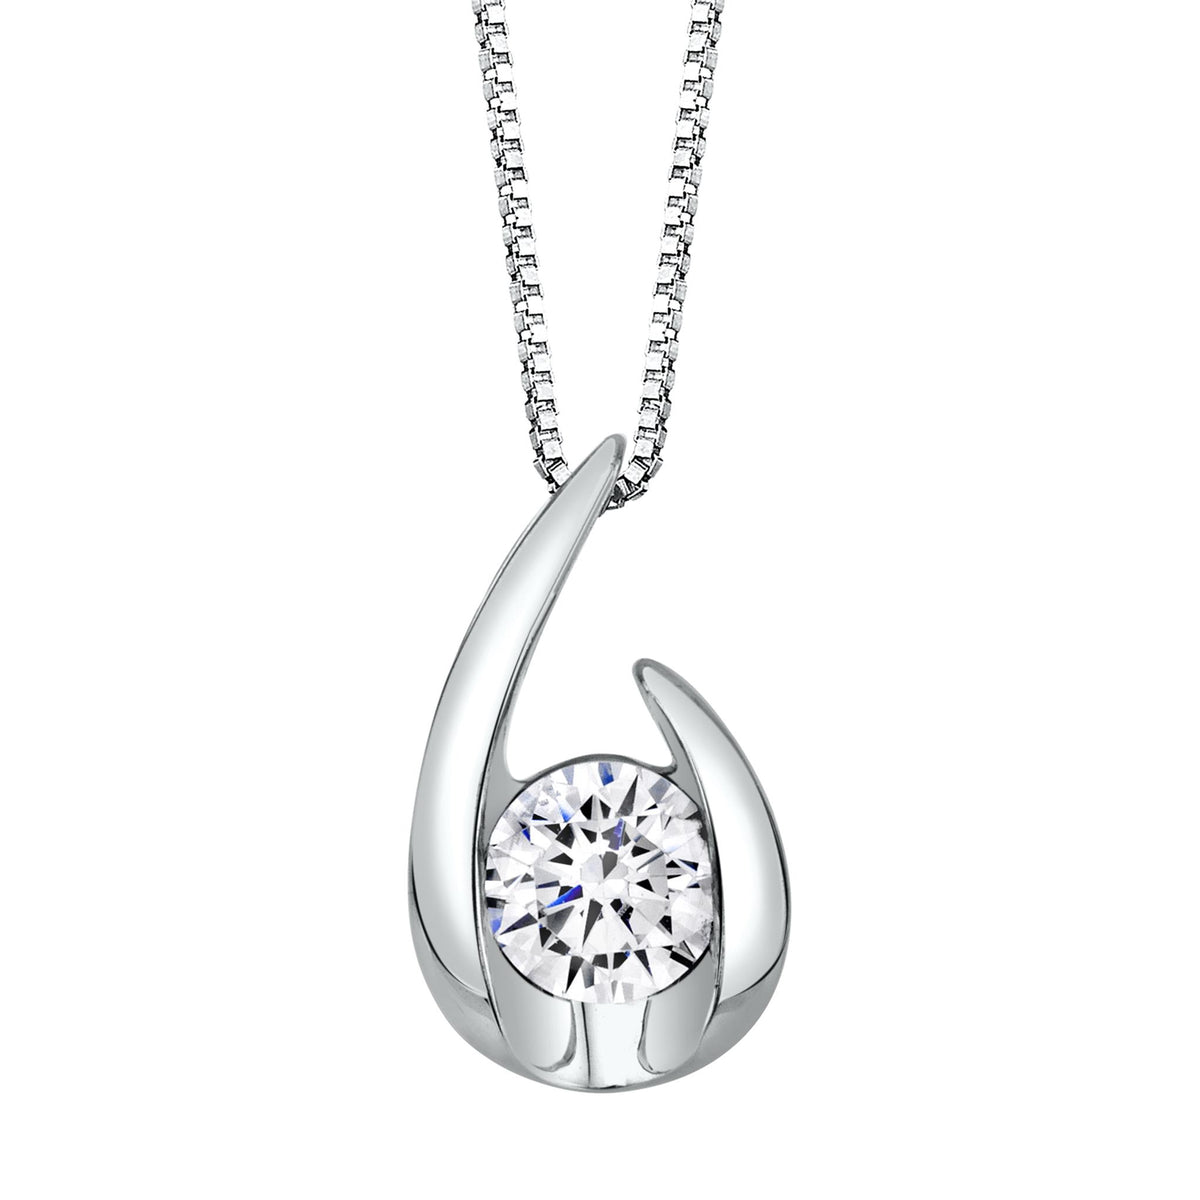 Hooked On Love 10Kt White Gold Solitaire Pendant With .20cttw Natural Diamond